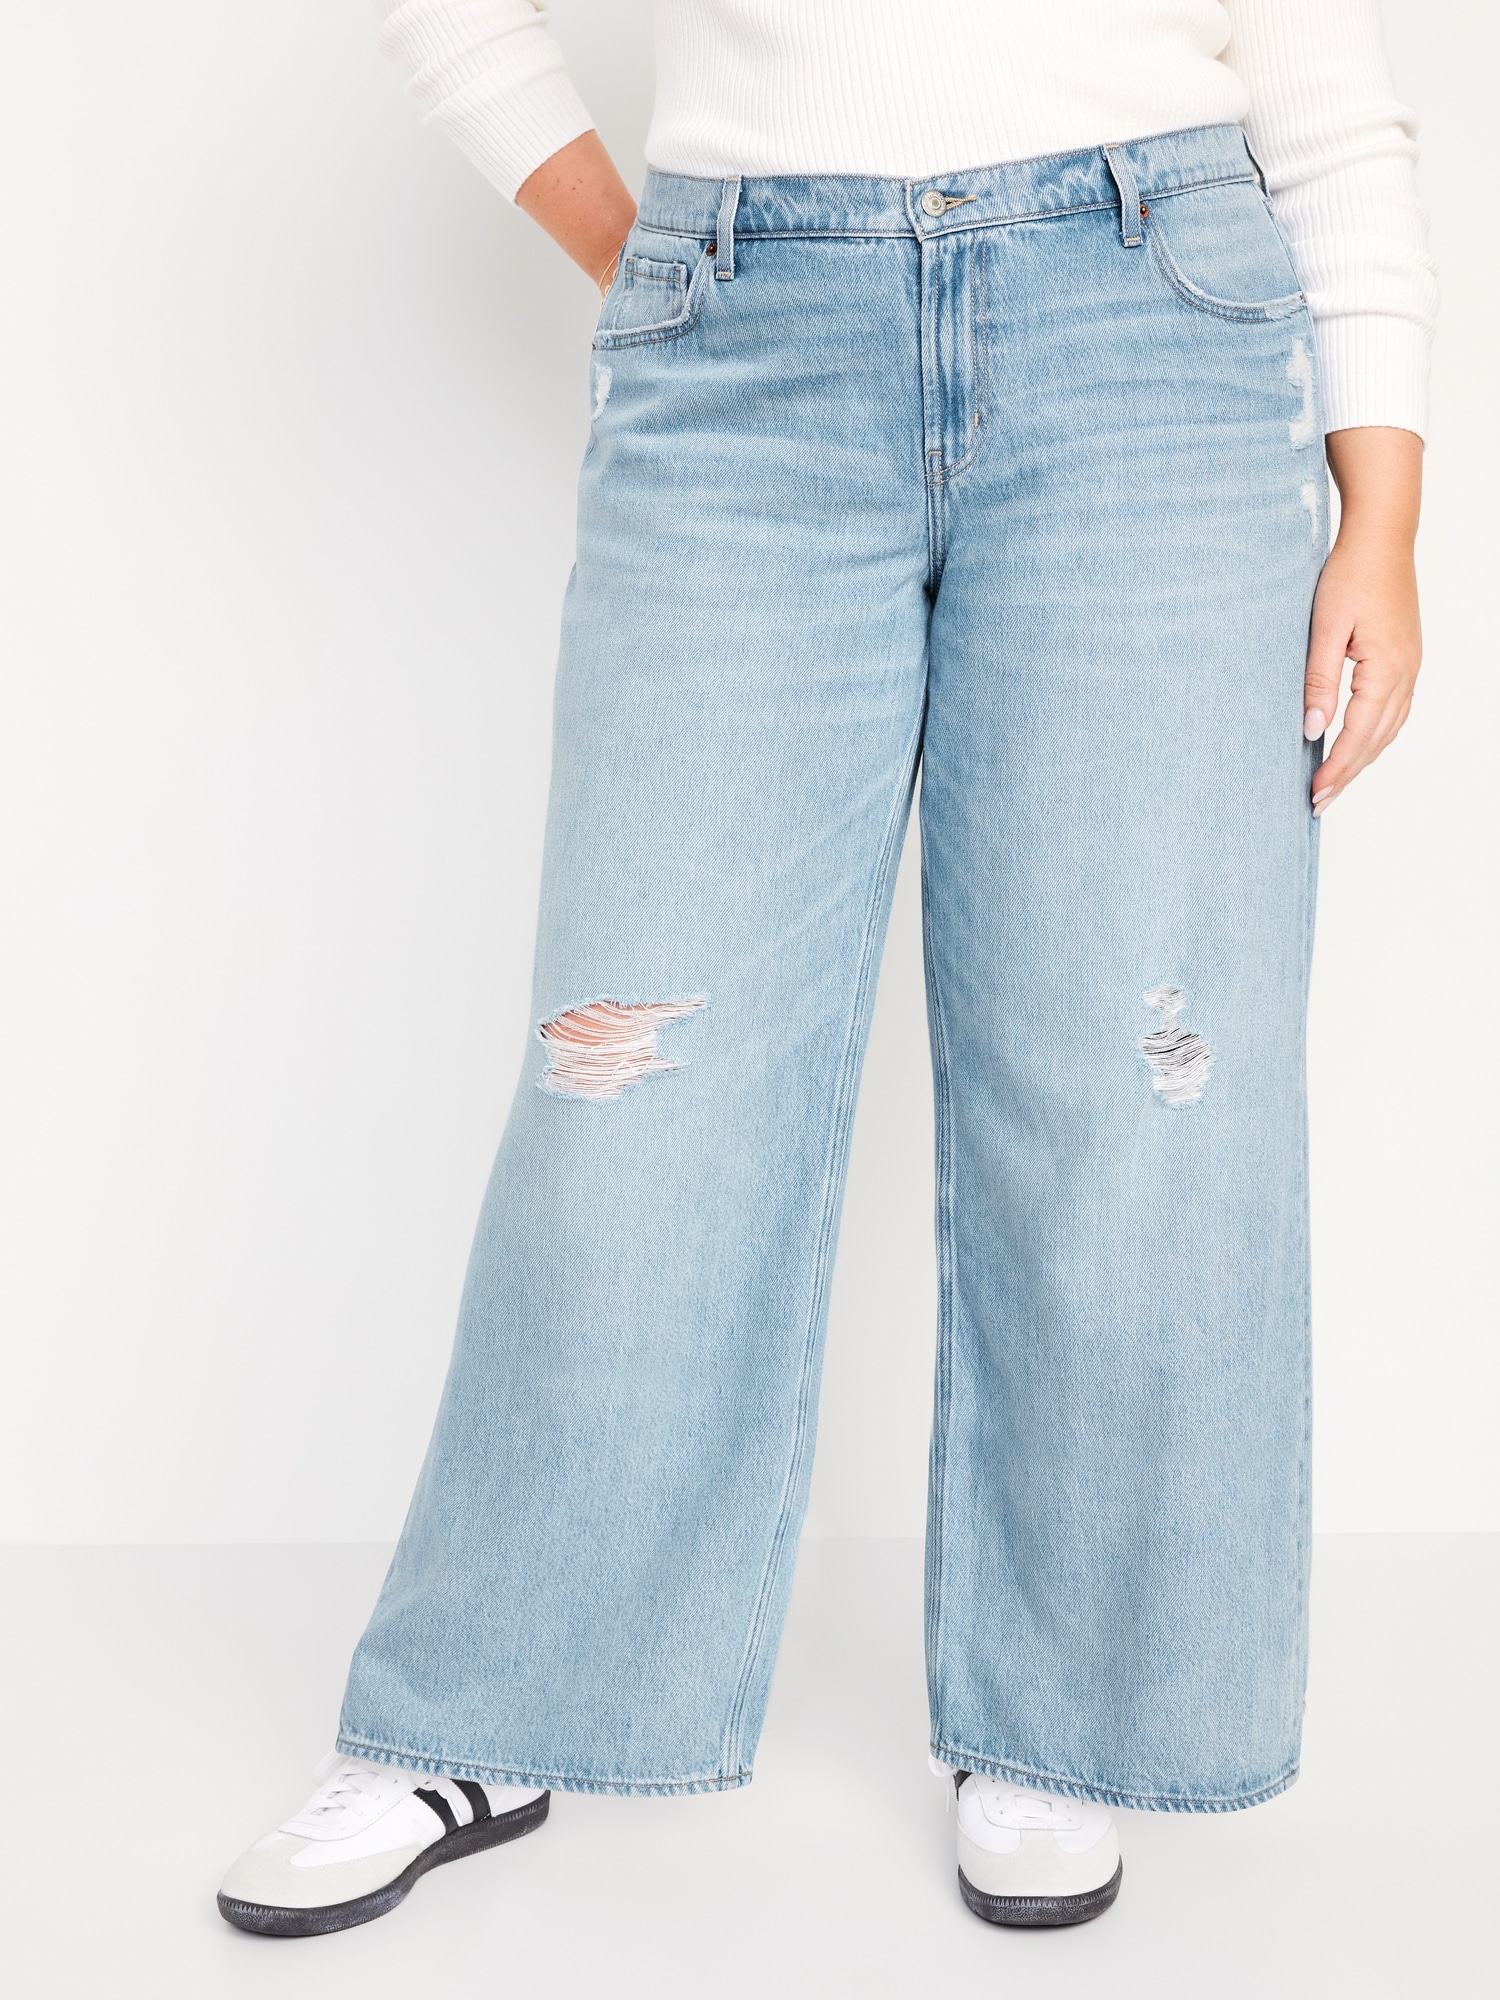 Vintage Blue Washed Mom Jeans Low Waist Baggy Style With Straight Leg And  Y2K Denim Wide Leg Trouser Jeans For Women Loose Fit 90s Style Style  #230427 From Kong003, $25.33